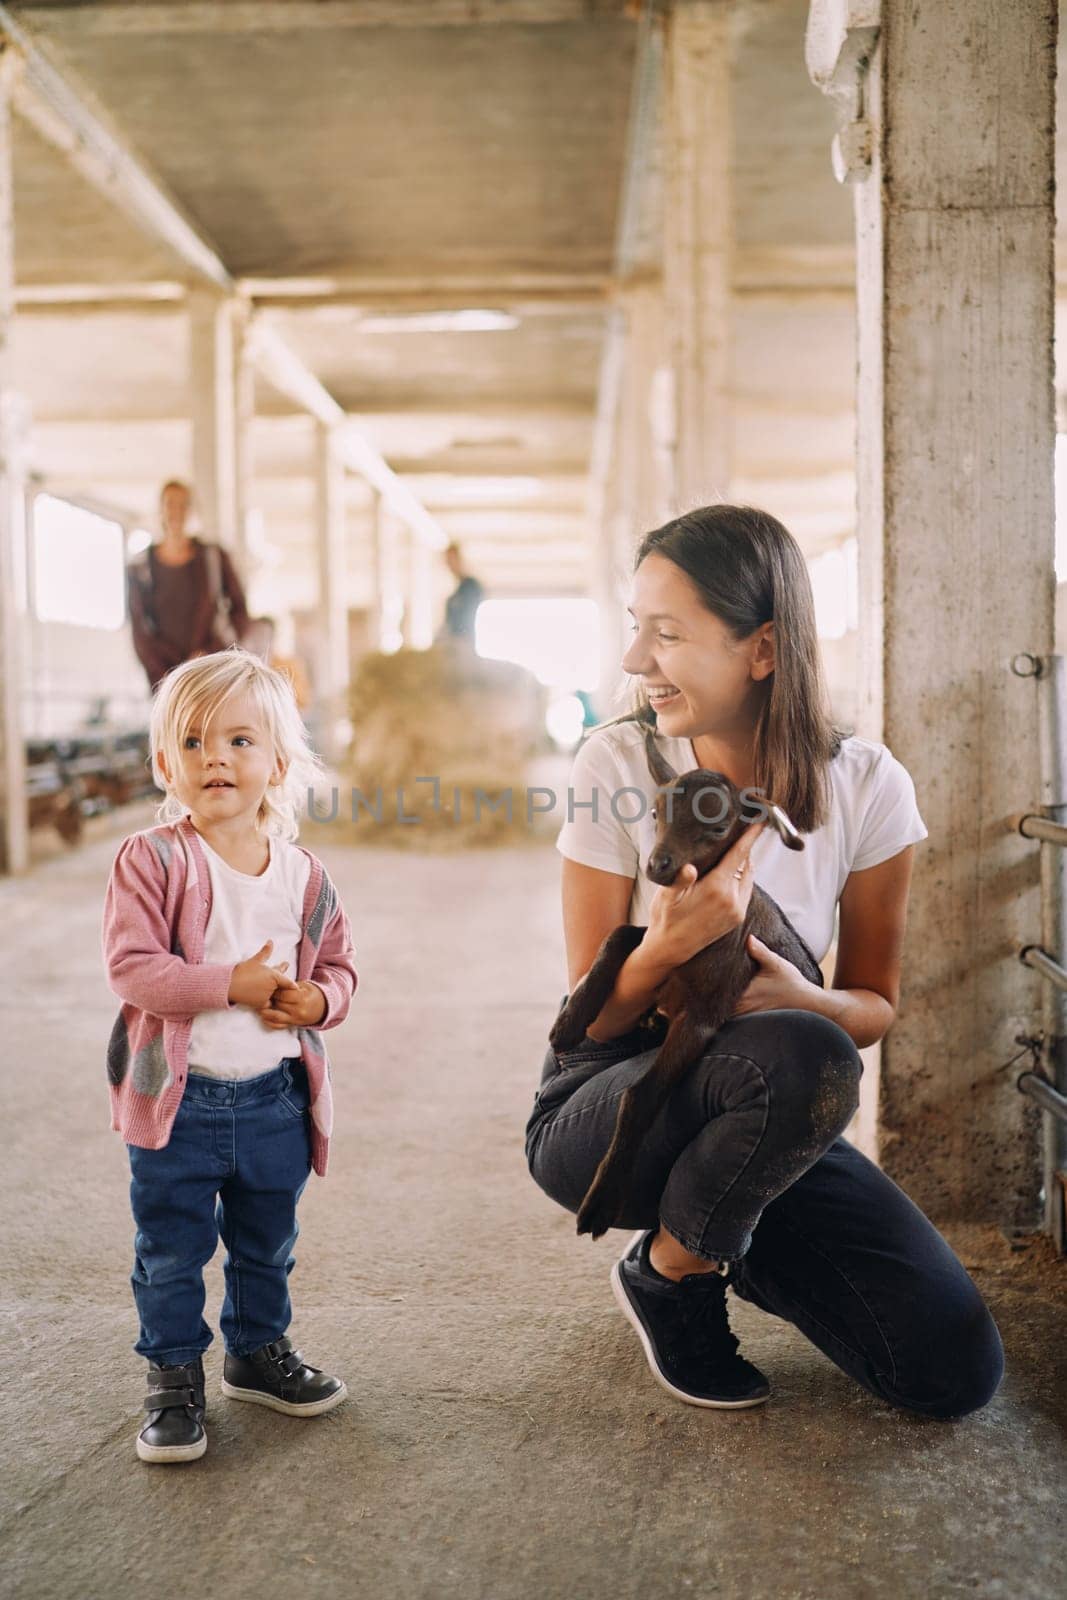 Squatting mother with a goatling in her arms looks at a little girl standing nearby. High quality photo